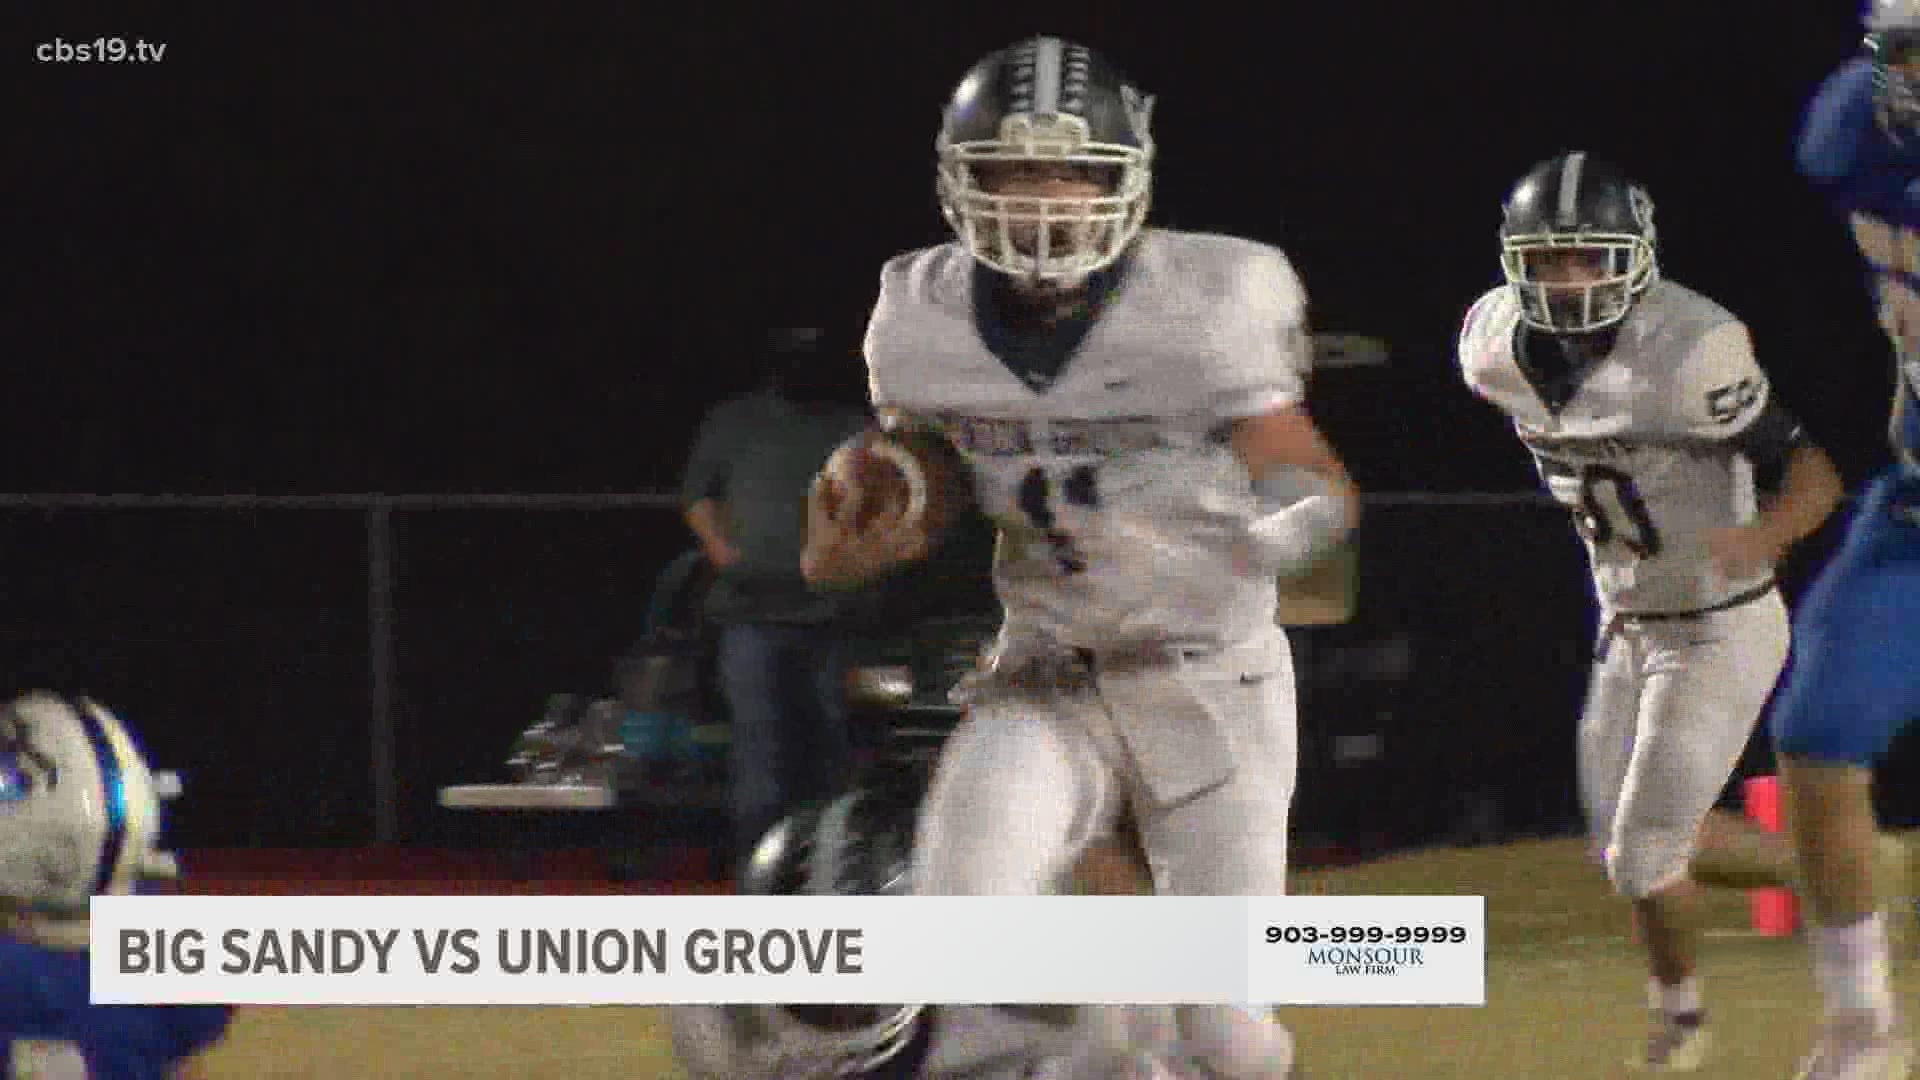 The Big Sandy Wildcats traveled to Union Grove to take on the Lions in the KYKX Game of the Week on Thursday, Oct. 15.